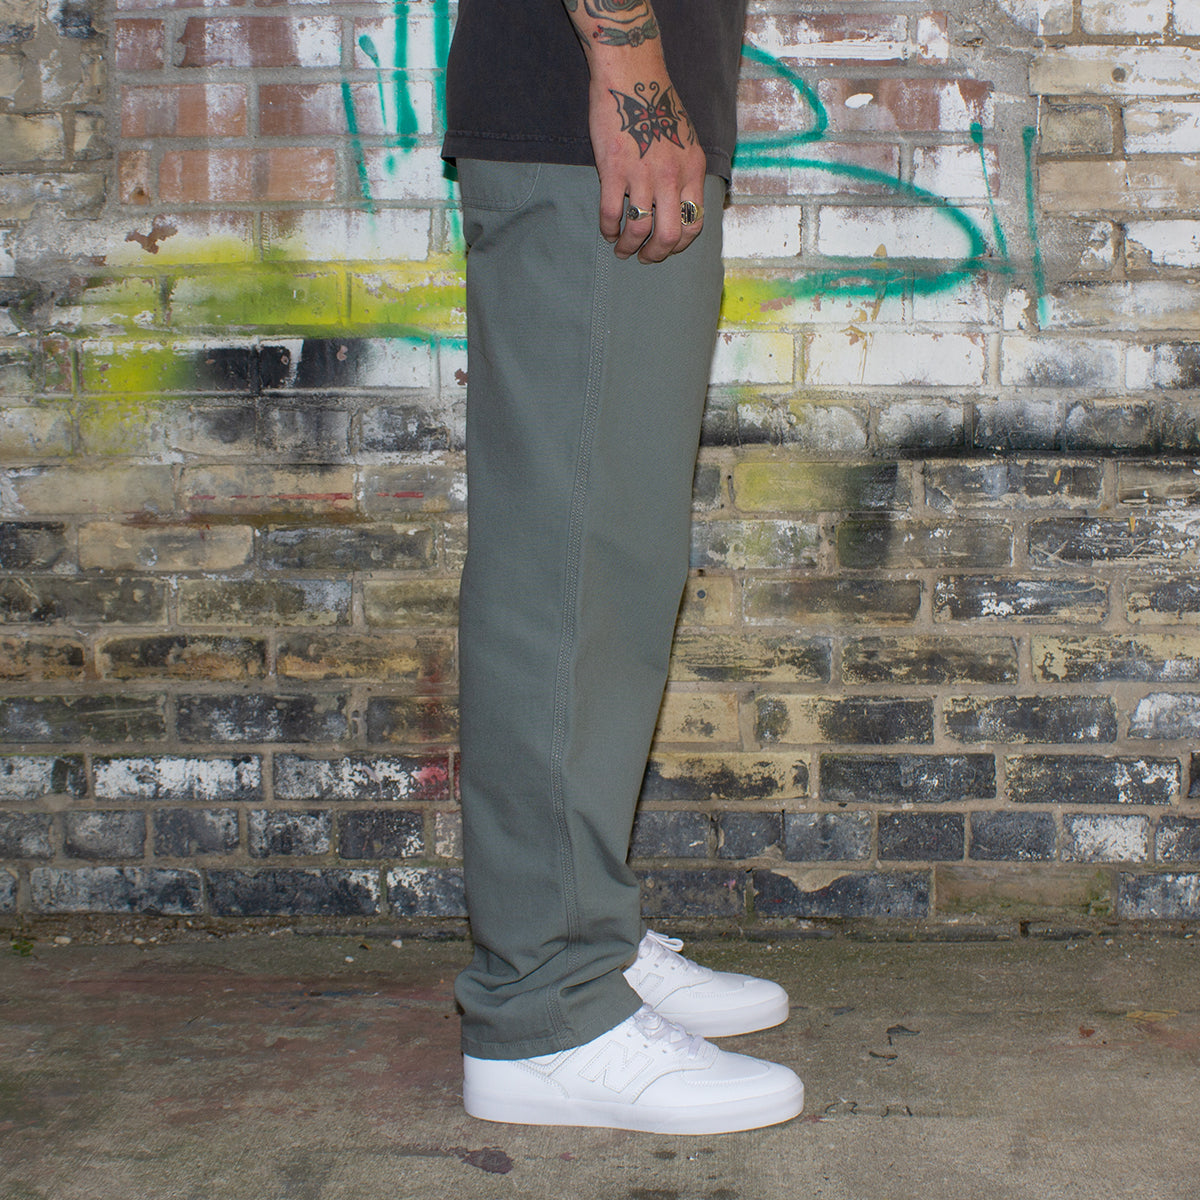 Carhartt WIP | Simple Pant Style # I031220-1ND Color : Smoke Green